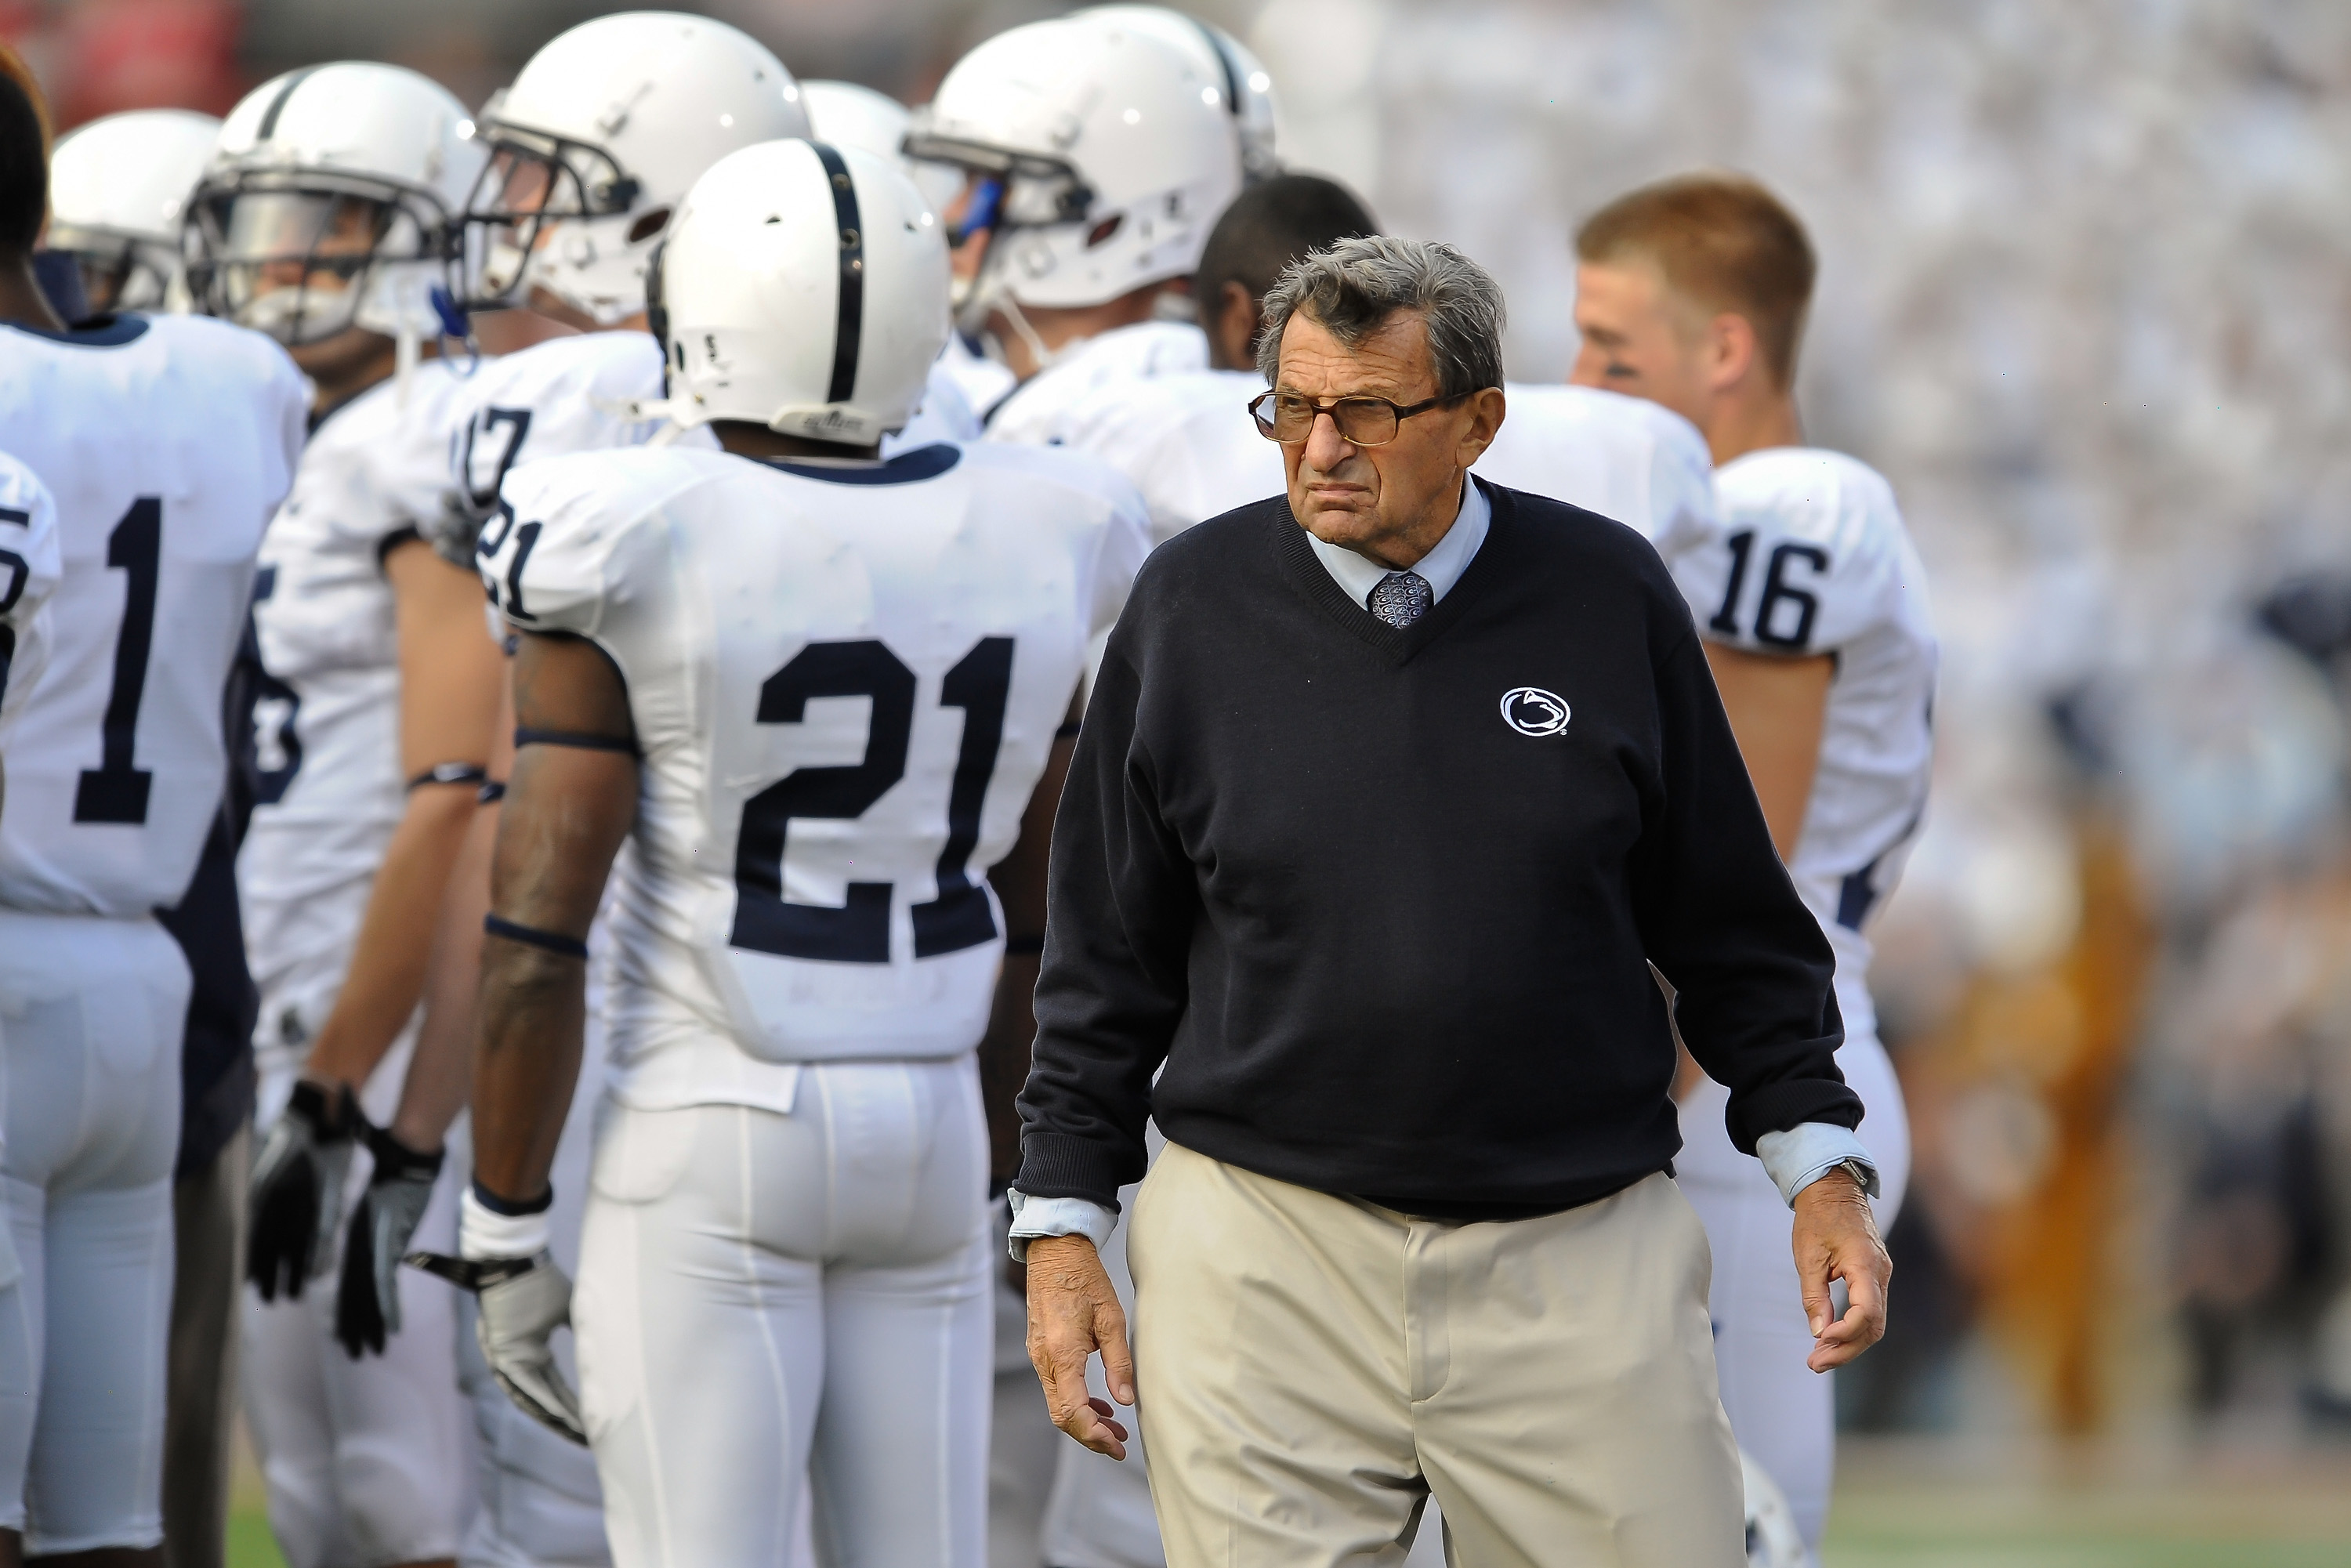 COLUMBUS, OH - NOVEMBER 13:  Head Coach Joe Paterno watches his team play the Ohio State Buckeyes at Ohio Stadium on November 13, 2010 in Columbus, Ohio.  (Photo by Jamie Sabau/Getty Images)